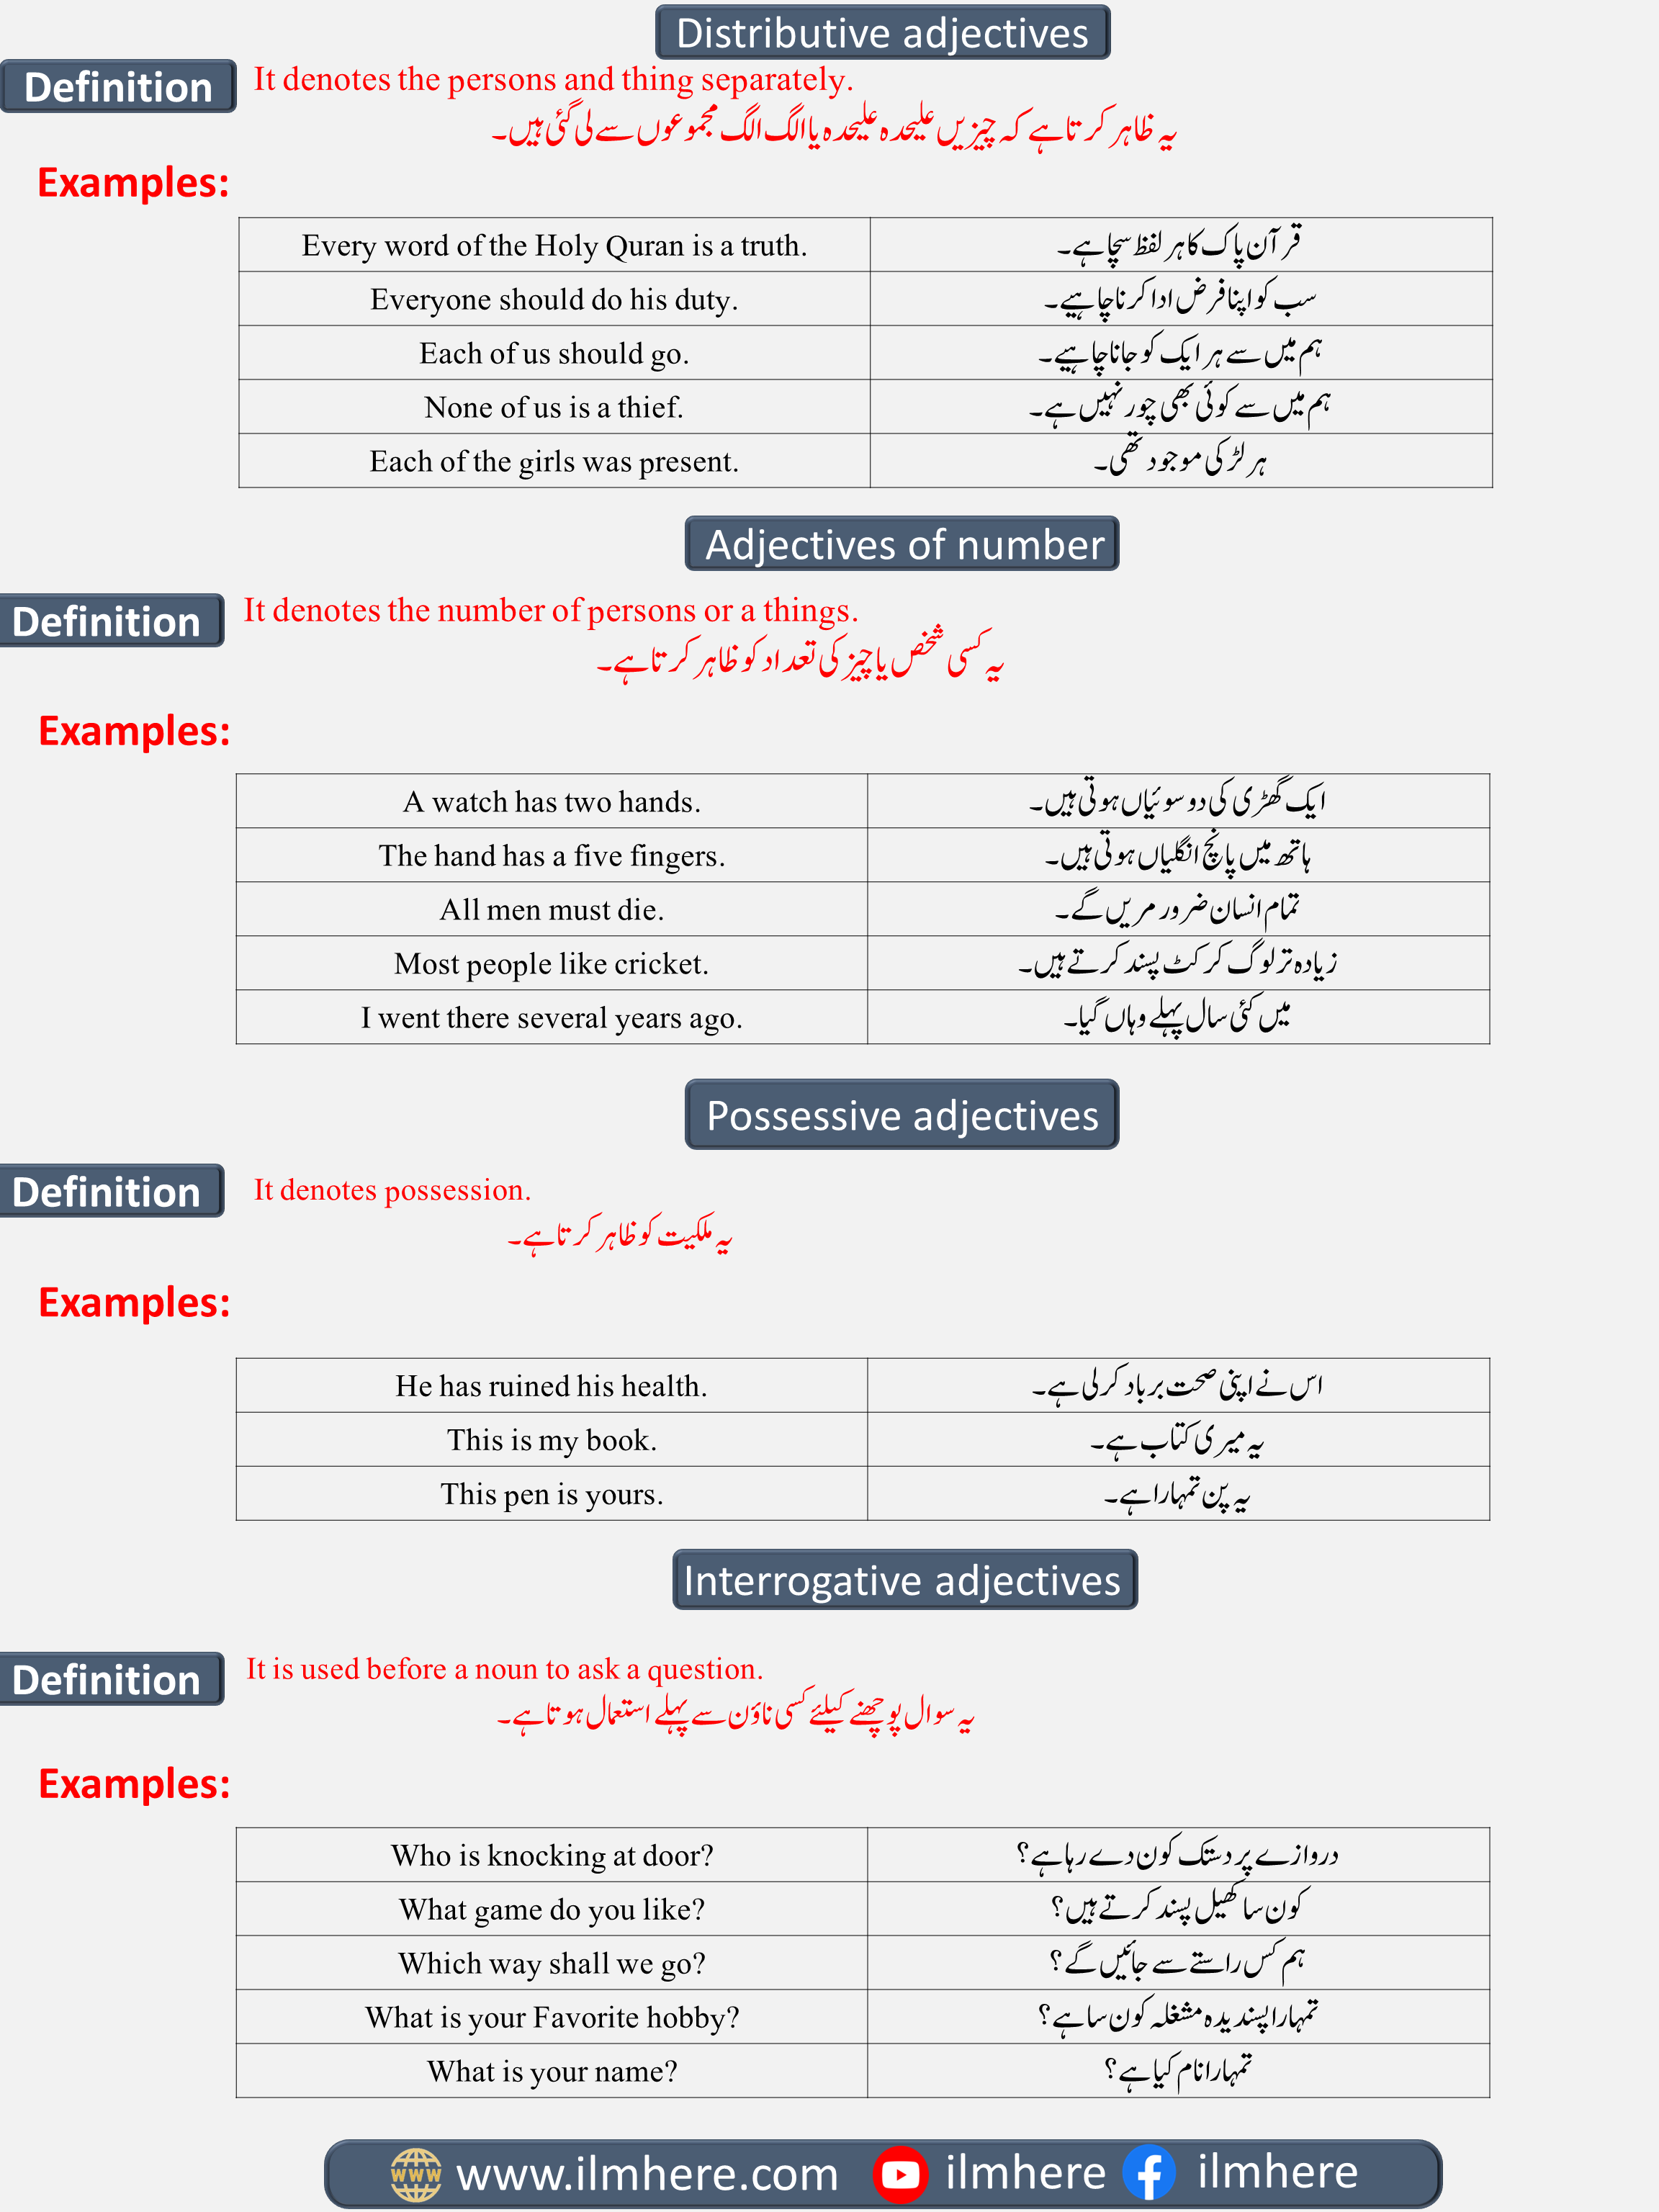 What Are Adjectives And Types Of Adjectives | PDF Download